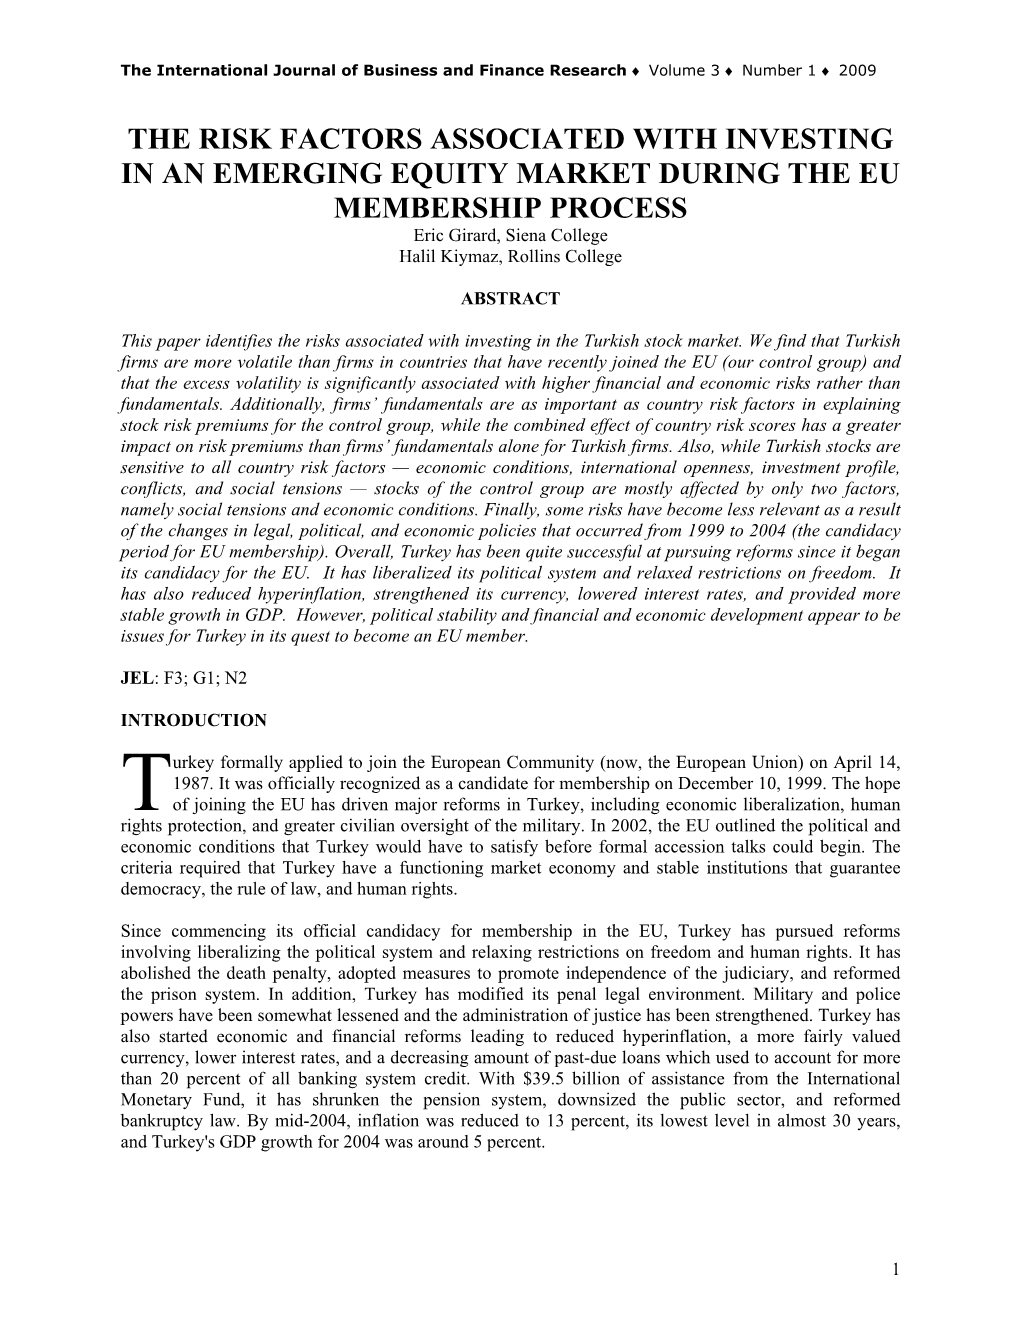 THE RISK FACTORS ASSOCIATED with INVESTING in an EMERGING EQUITY MARKET DURING the EU MEMBERSHIP PROCESS Eric Girard, Siena College Halil Kiymaz, Rollins College